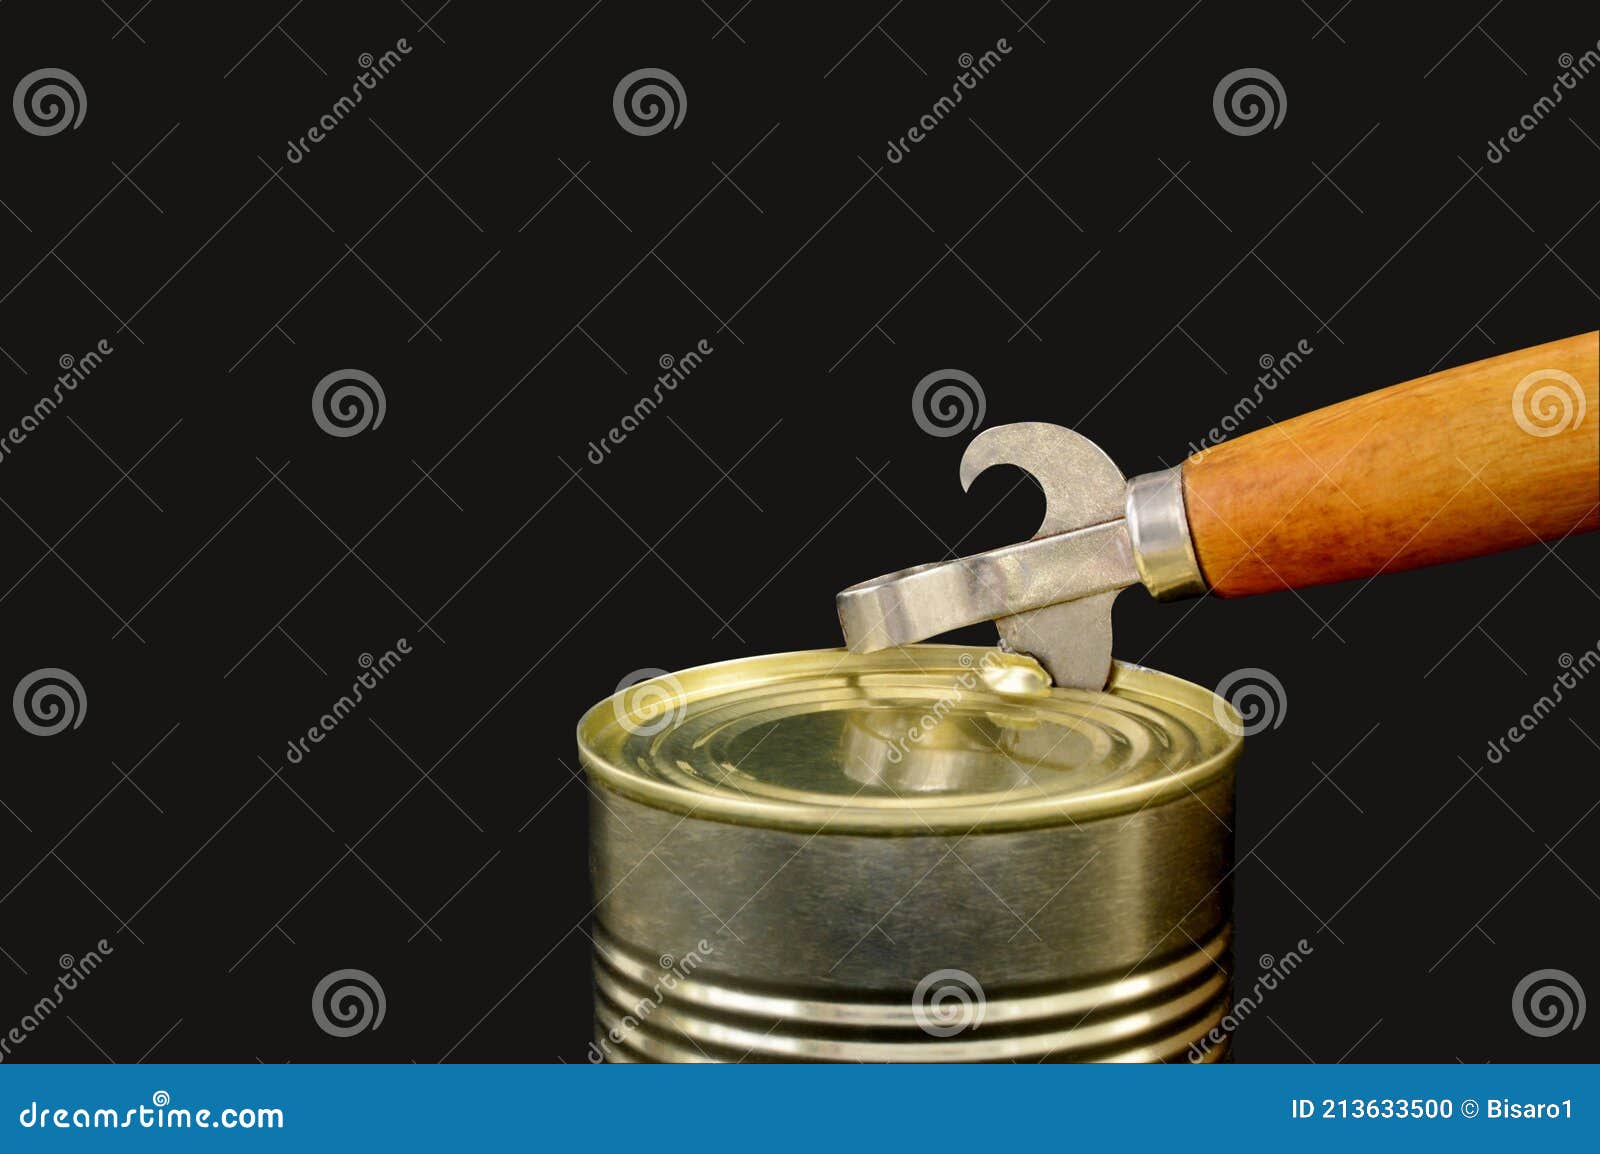 Old style tin opener opening a can, isolated on white background